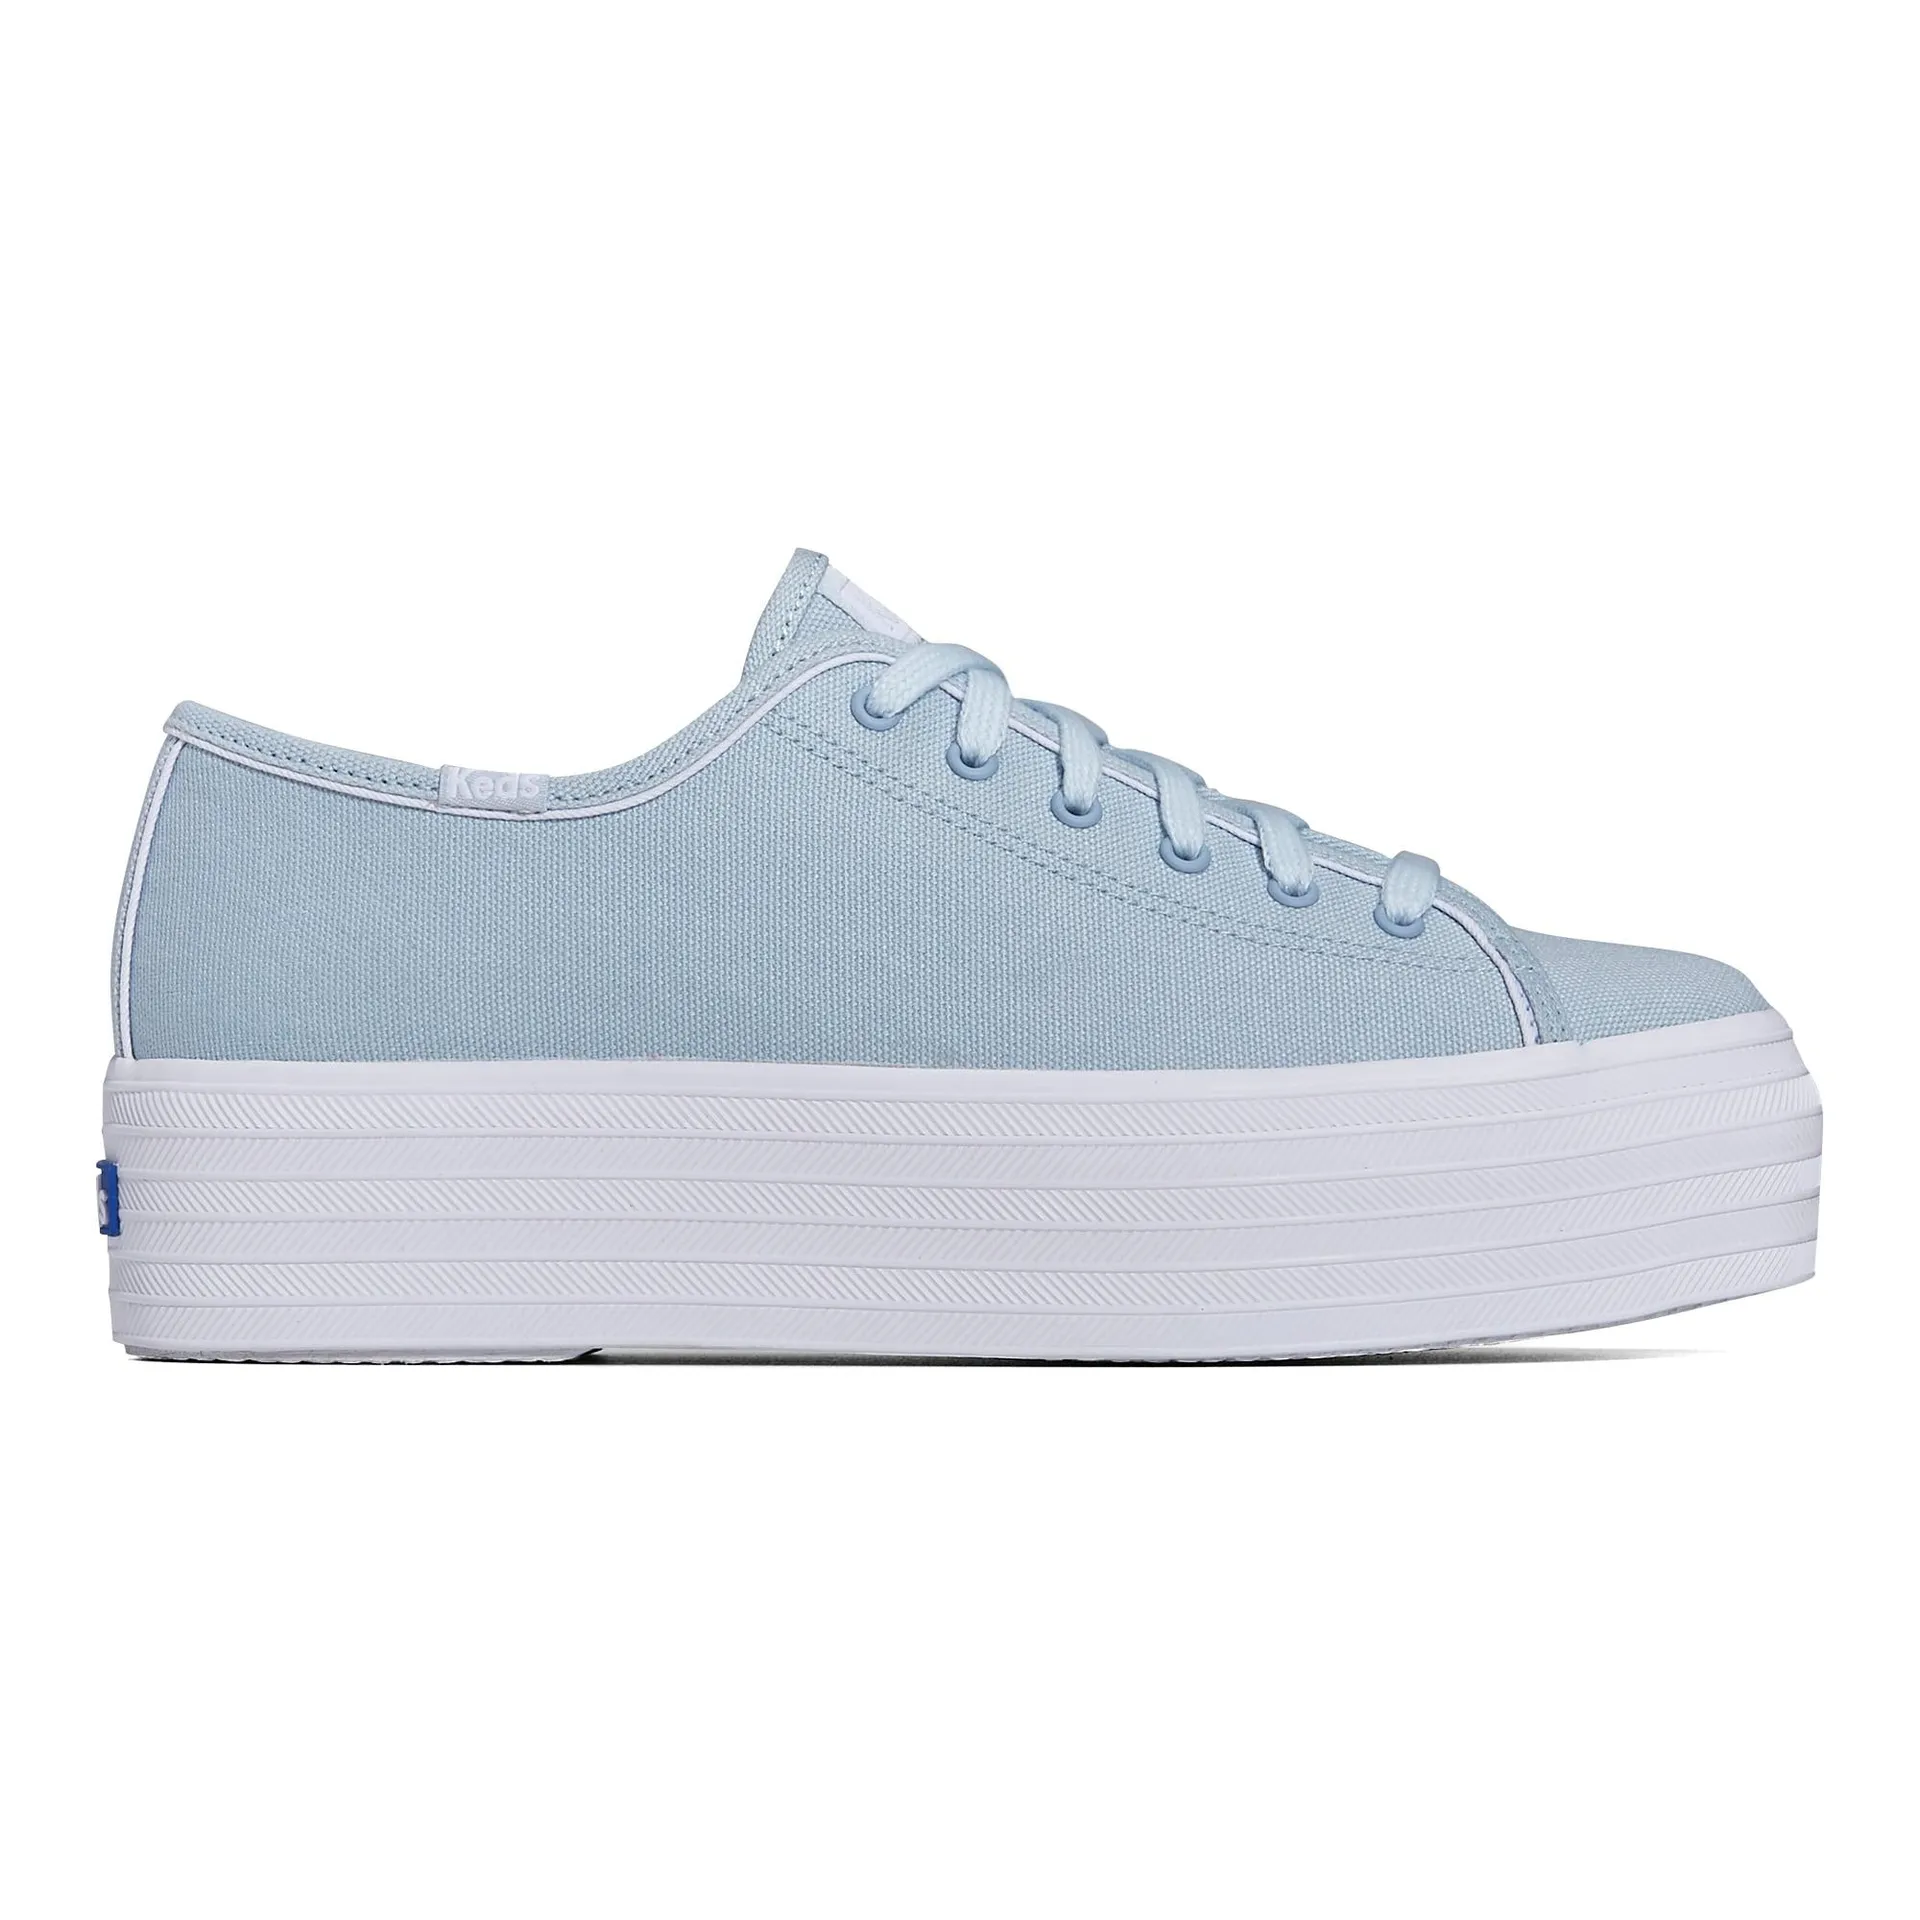 Keds Triple Up Canvas Piping Lace Up